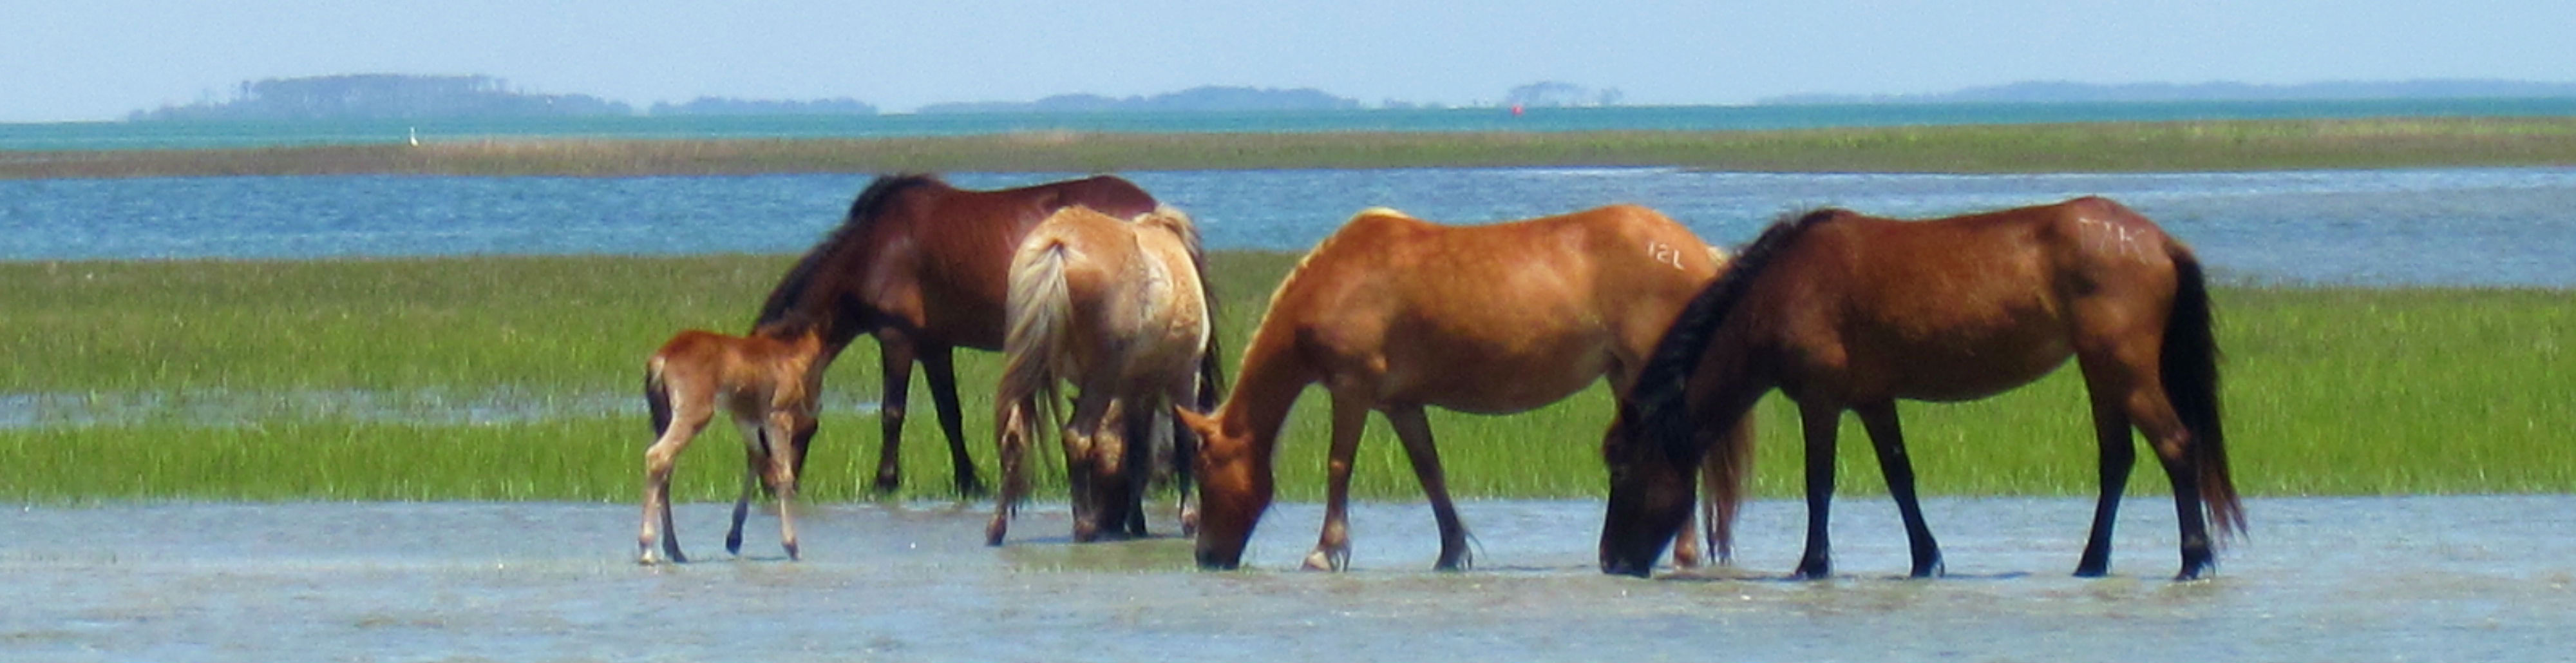 Watching horses on Shackleford Banks - Cape Lookout National Seashore